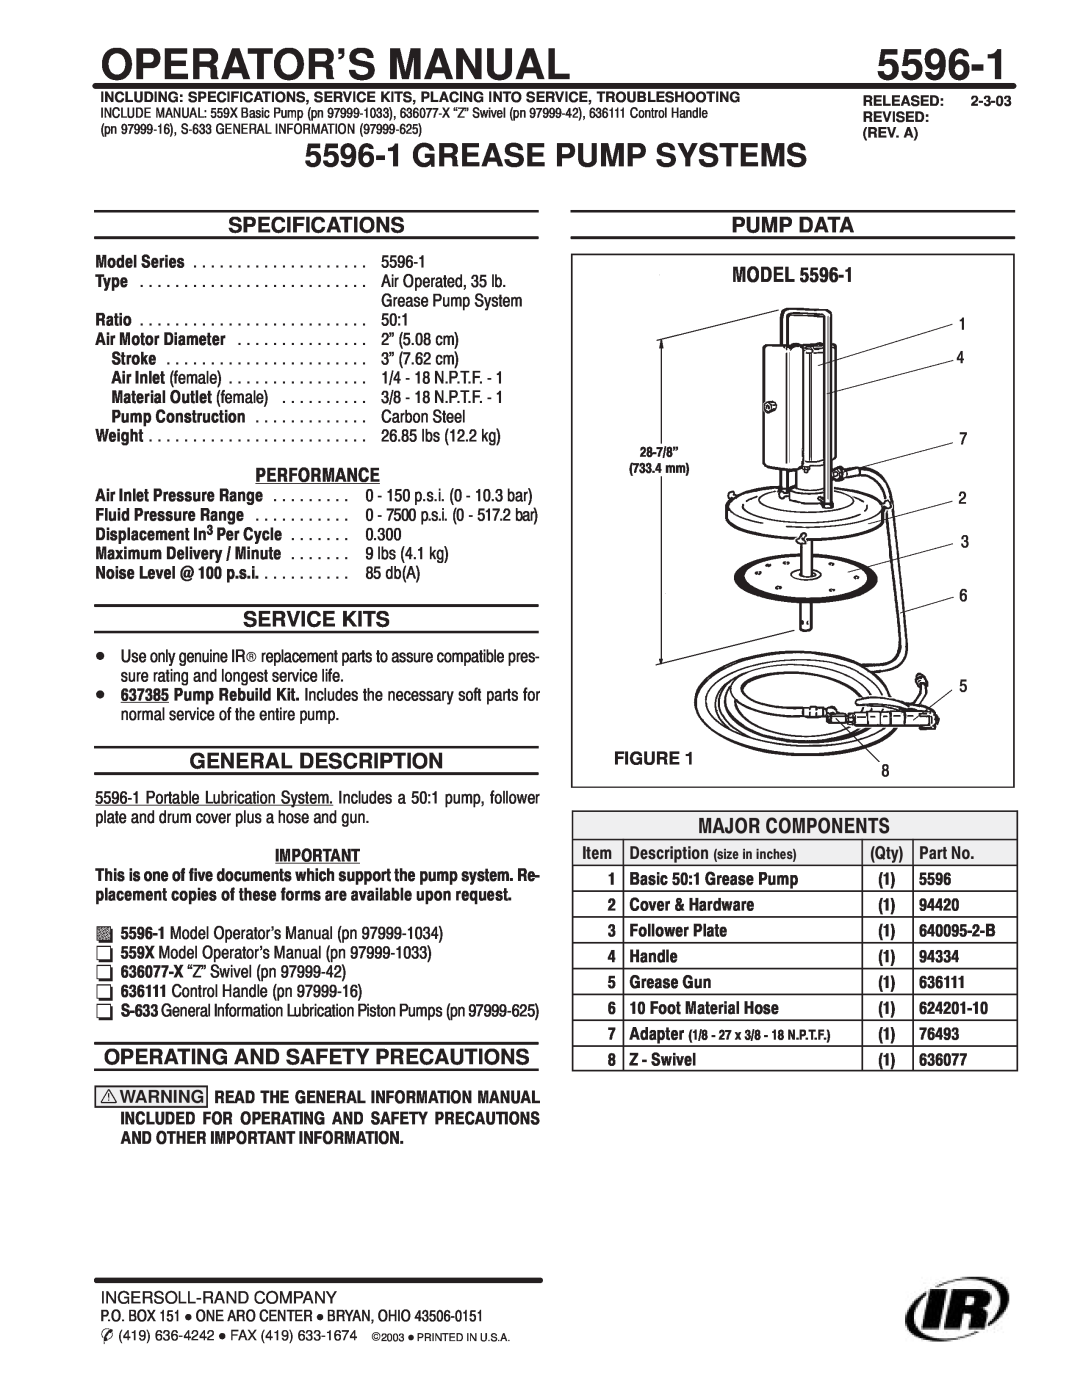 Ingersoll-Rand 5596-1 specifications Specifications, Pump Data, Service Kits, General Description, Operator’S Manual 